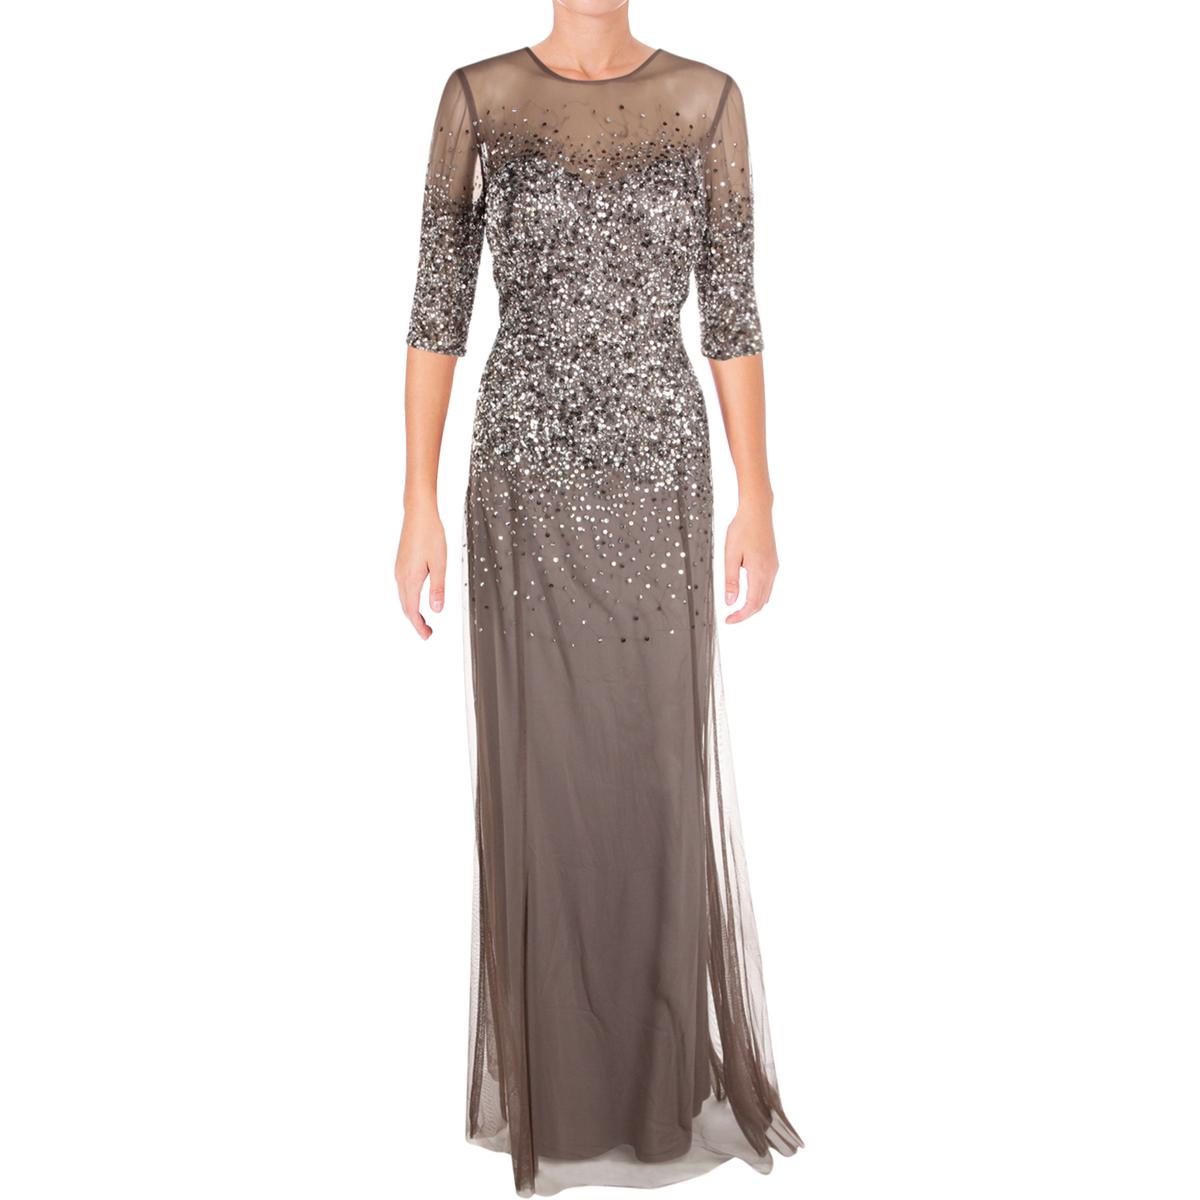 Adrianna Papell Womens Gray Sequined Full-Length Evening Dress Gown 4 ...